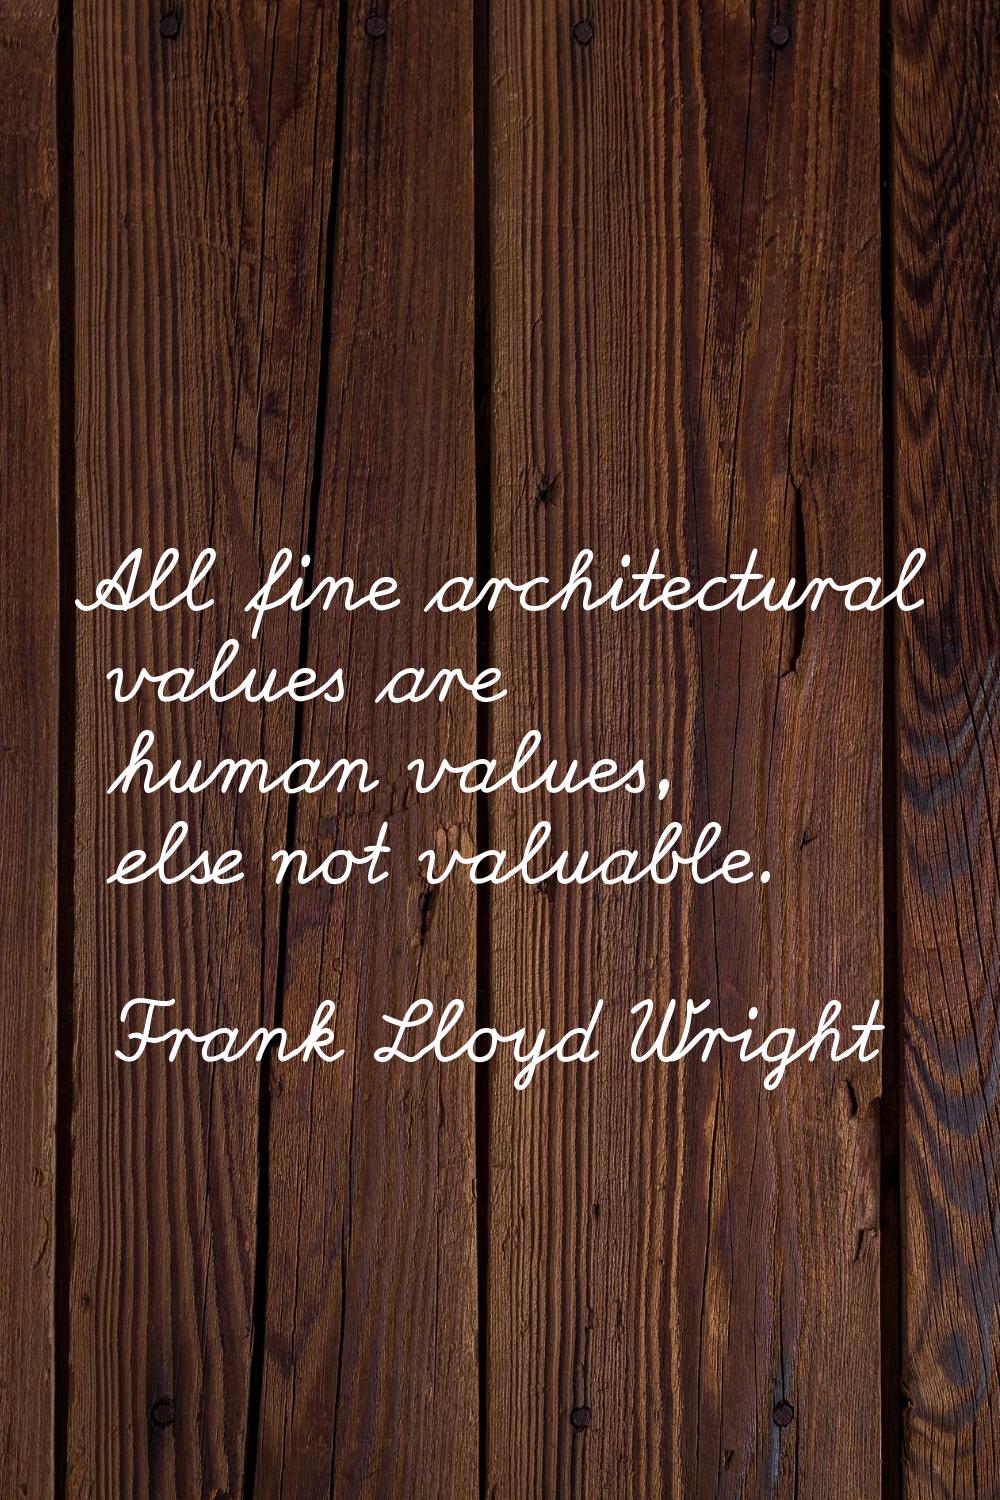 All fine architectural values are human values, else not valuable.